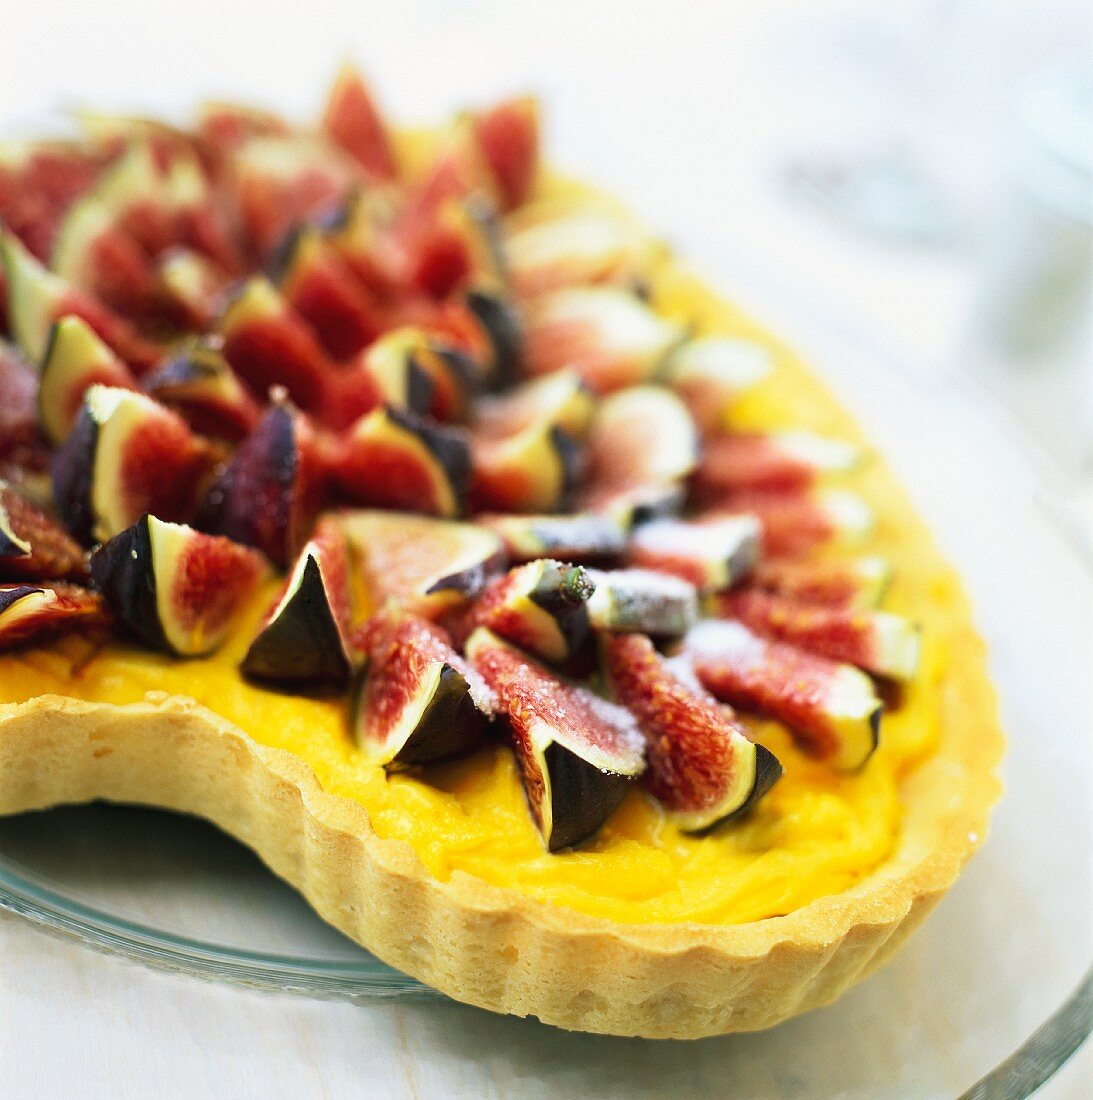 A heart-shaped fig tart with vanilla pudding